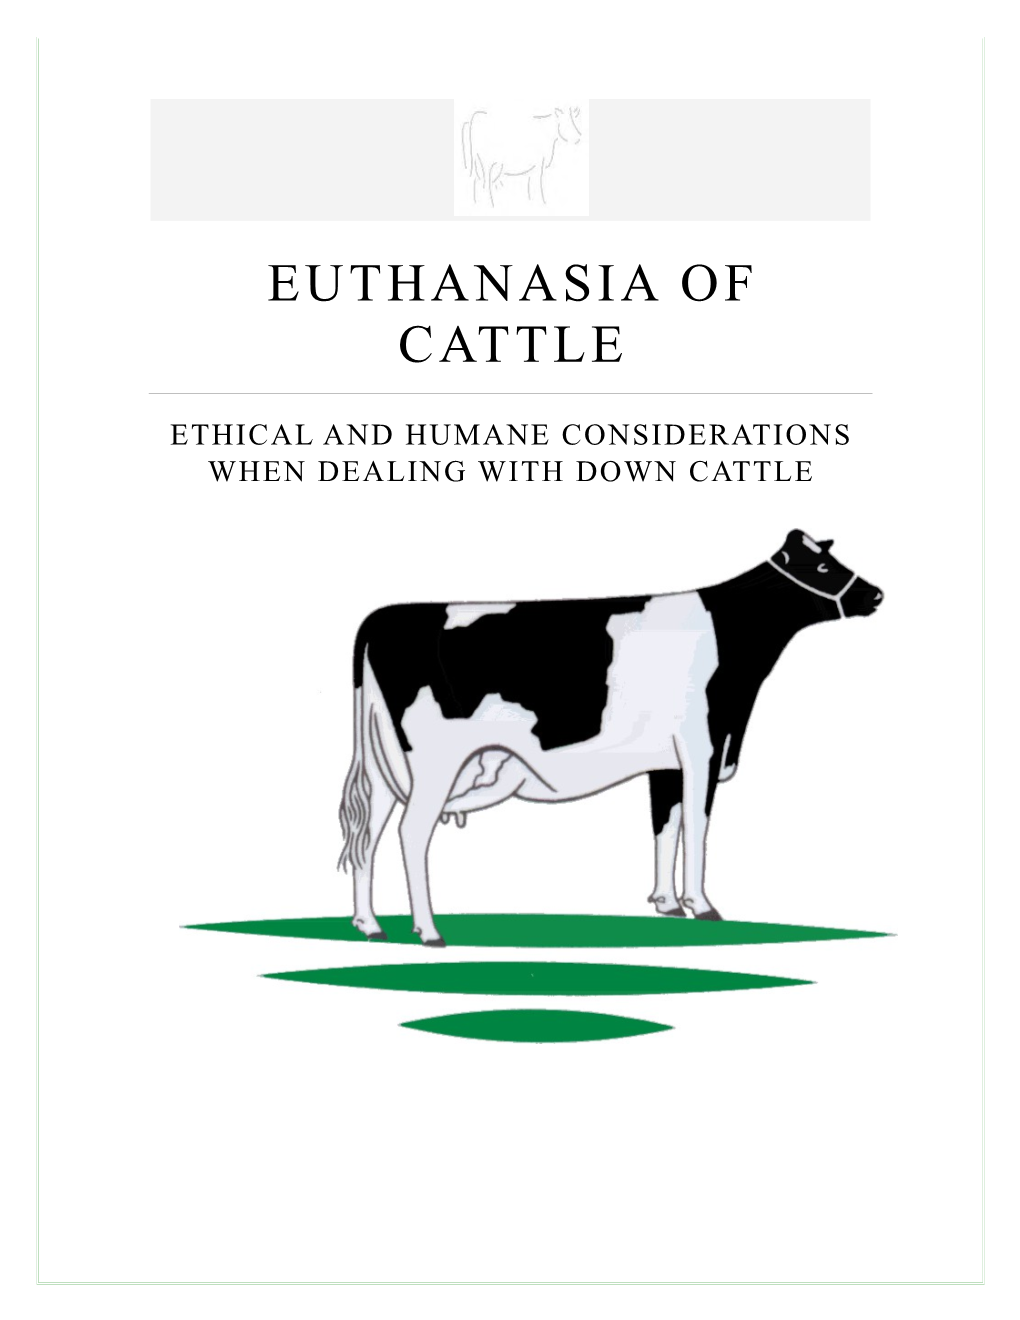 Ethical and Humane Considerations When Dealing with Down Cattle